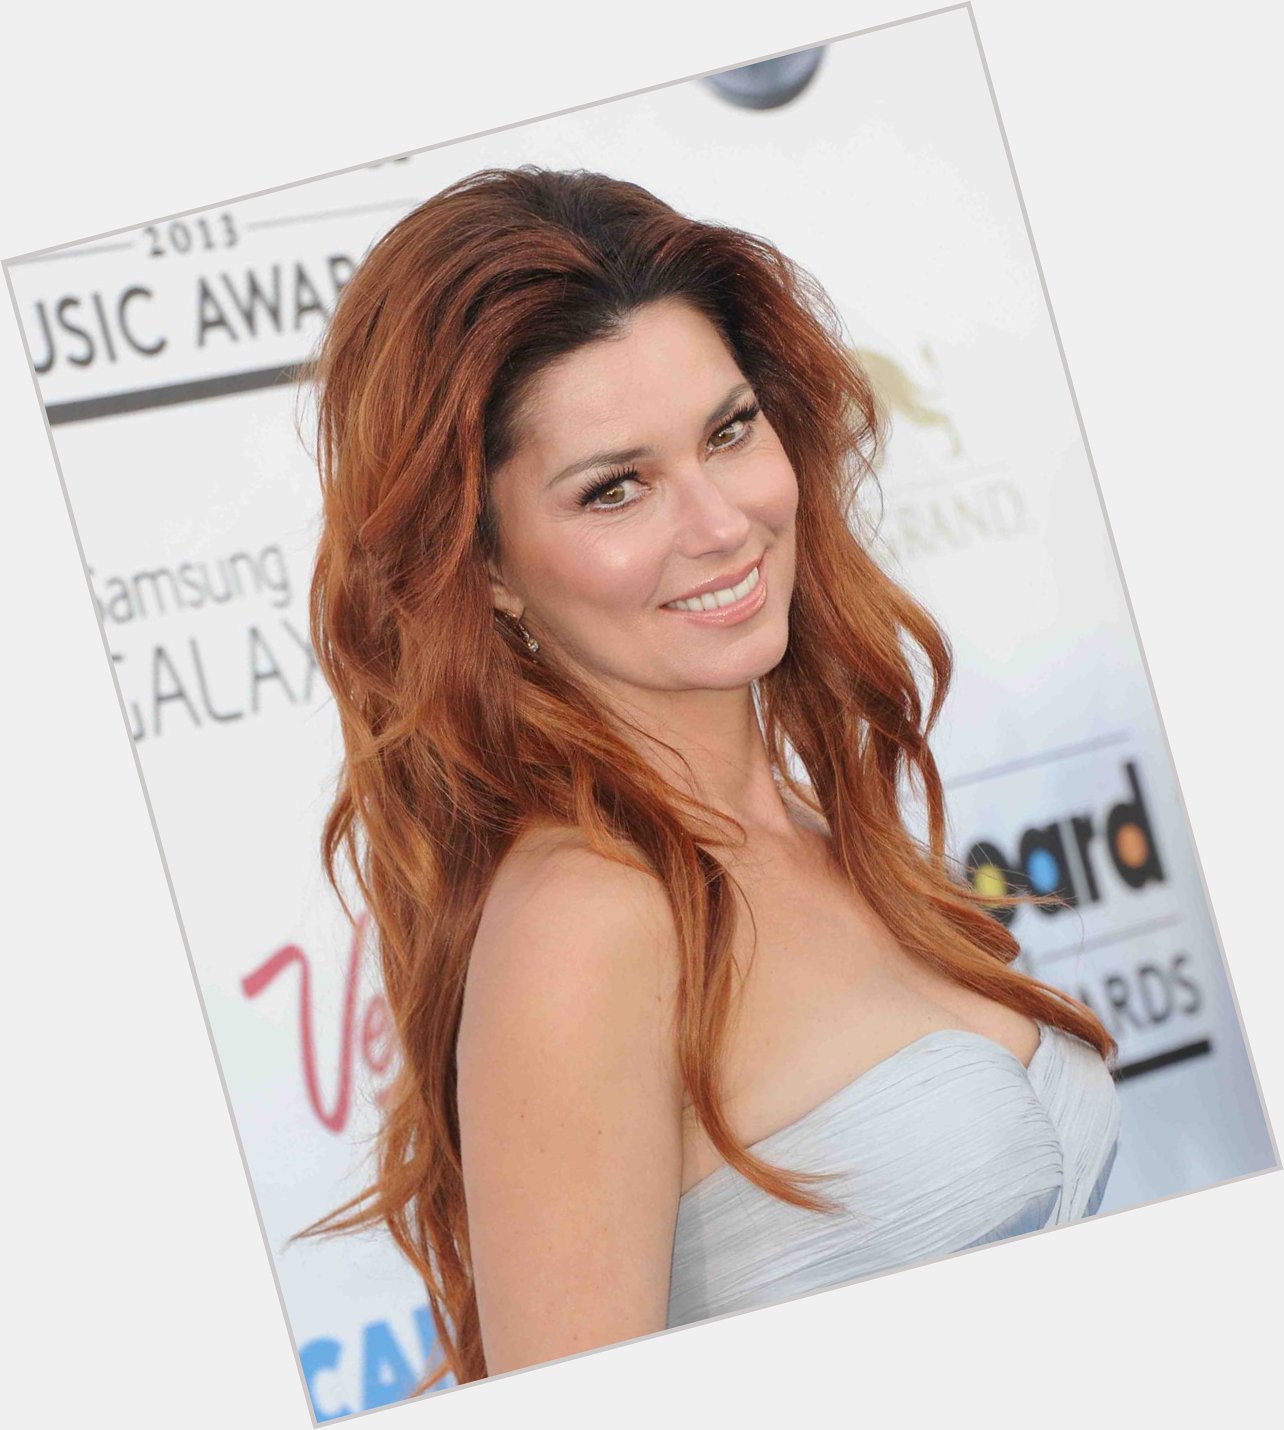 HAPPY BIRTHDAY!  If it\s your birthday today, you are sharing it with Shania Twain.  Have an amazing day :-) 